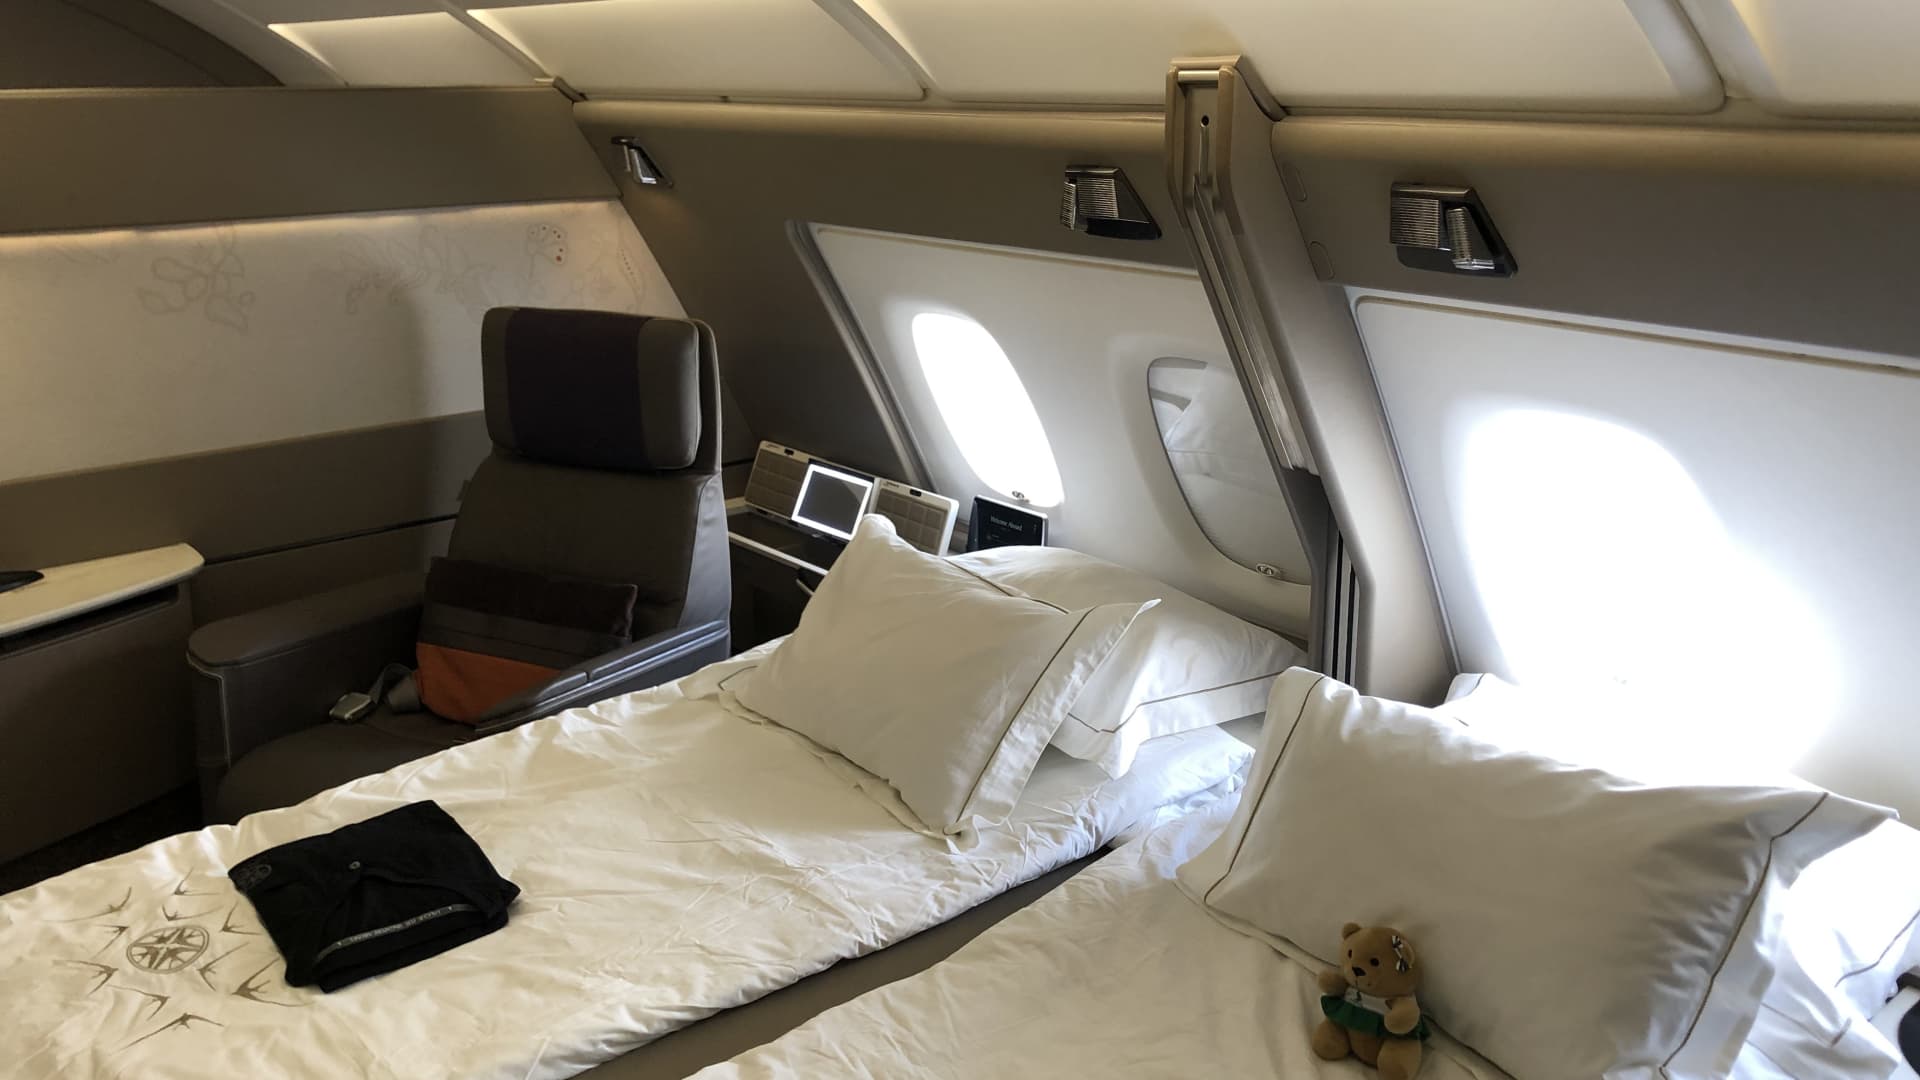 Singapore Airlines A380 first class suites